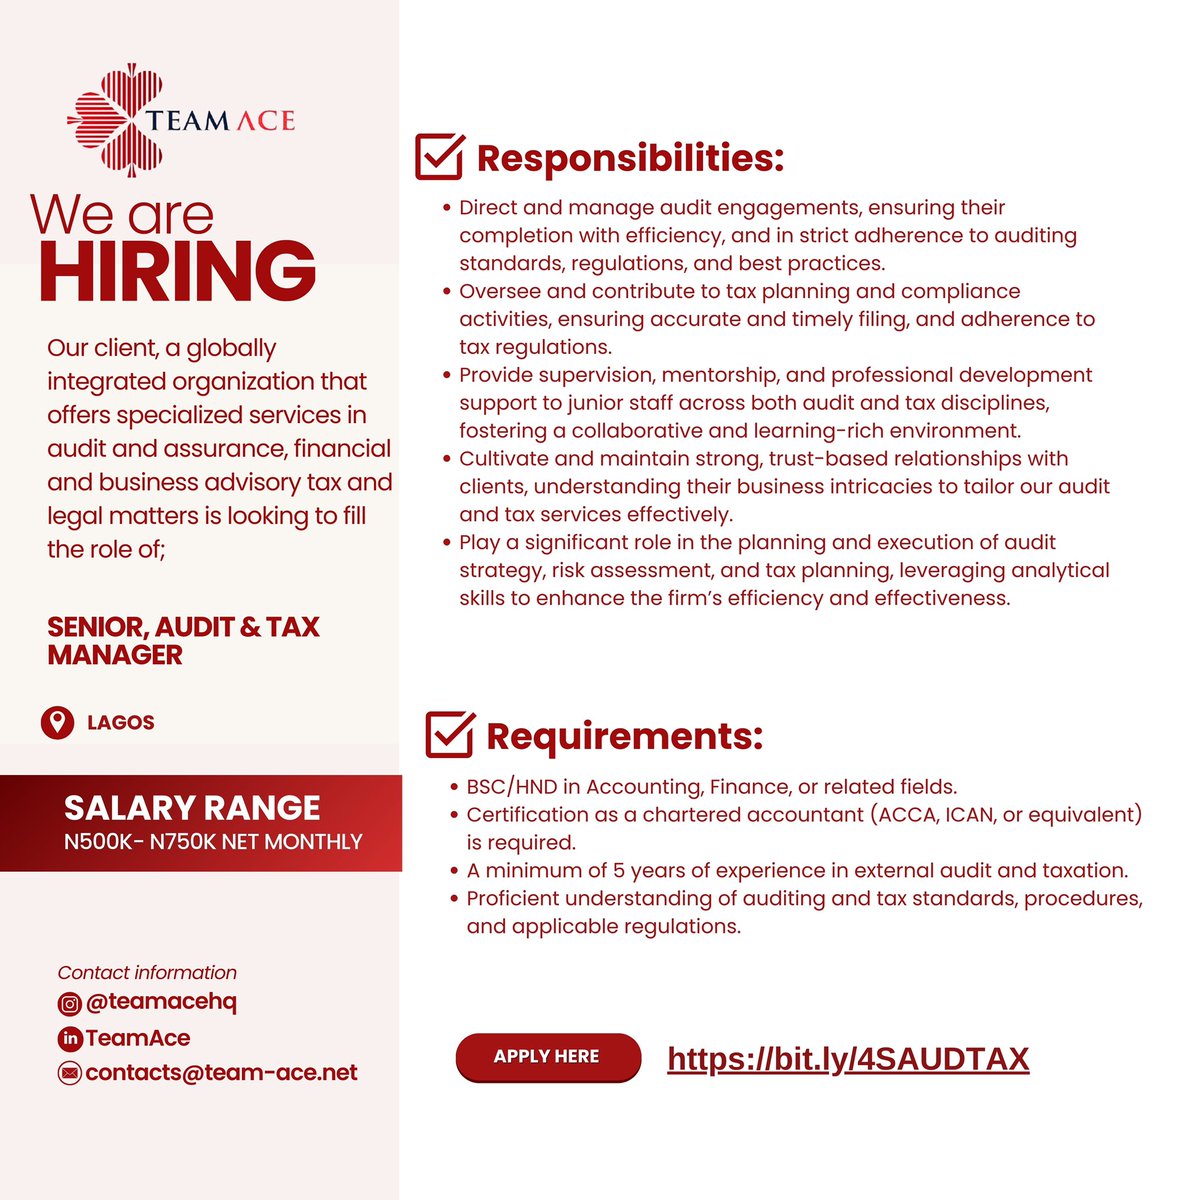 Job opening! 
See flier for details👇🏽
        
Qualified and Interested? Apply here👇🏽
bit.ly/4SAUDTAX

#taxmanager #taxmanagerjob #hiringnow #jobopenings #vacancy #teamace Opay The CBN